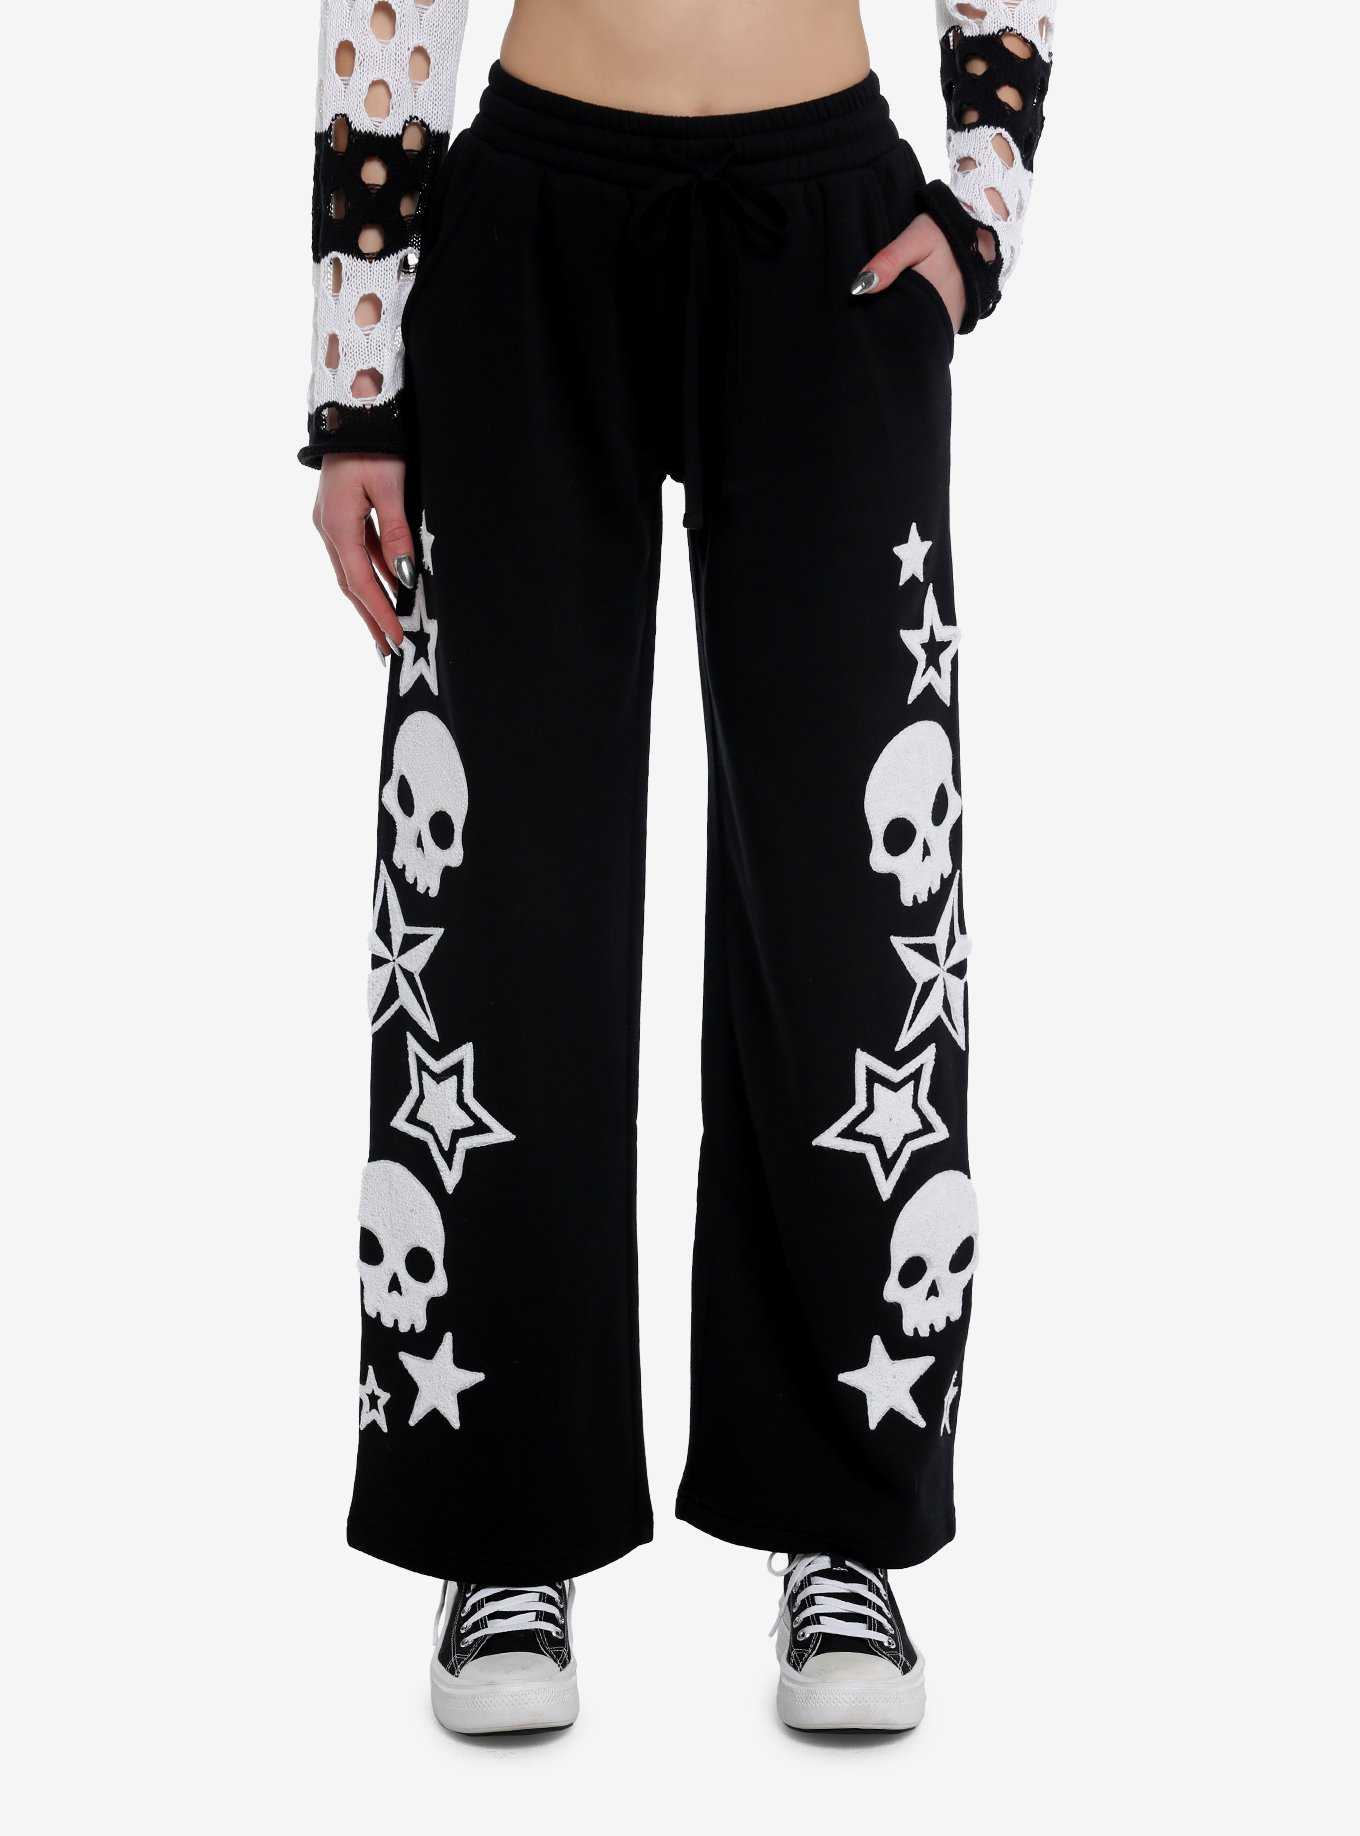 Hot Topic Social Collision Final Girl Icons Girls Sweatpants